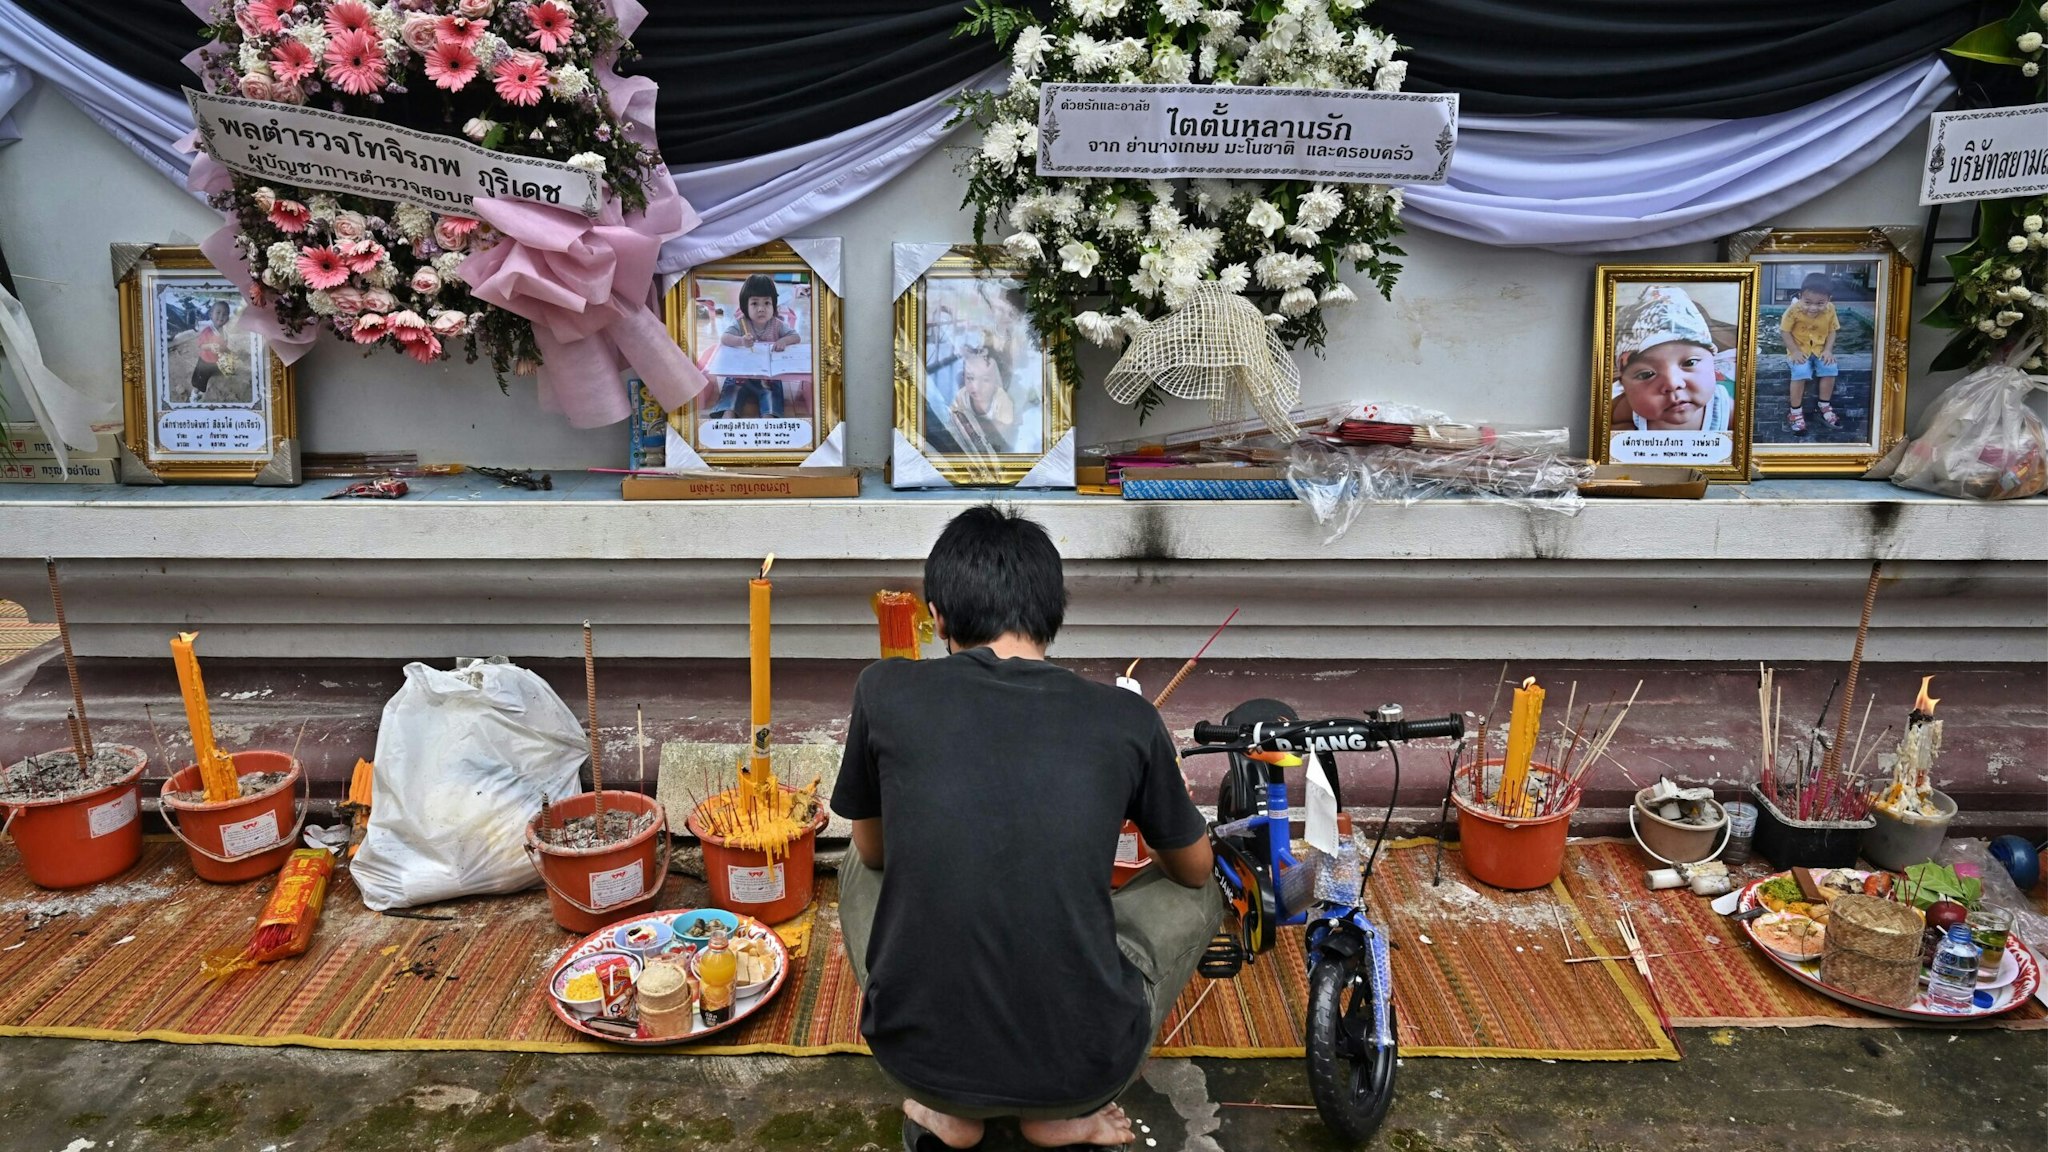 A mourner prays for the victims of the nursery mass shooting at Wat Rat Samakee temple in northeastern Nong Bua Lam Phu province on October 10, 2022, as relatives hold funeral rites for those killed in the massacre. (Photo by Lillian SUWANRUMPHA / AFP)